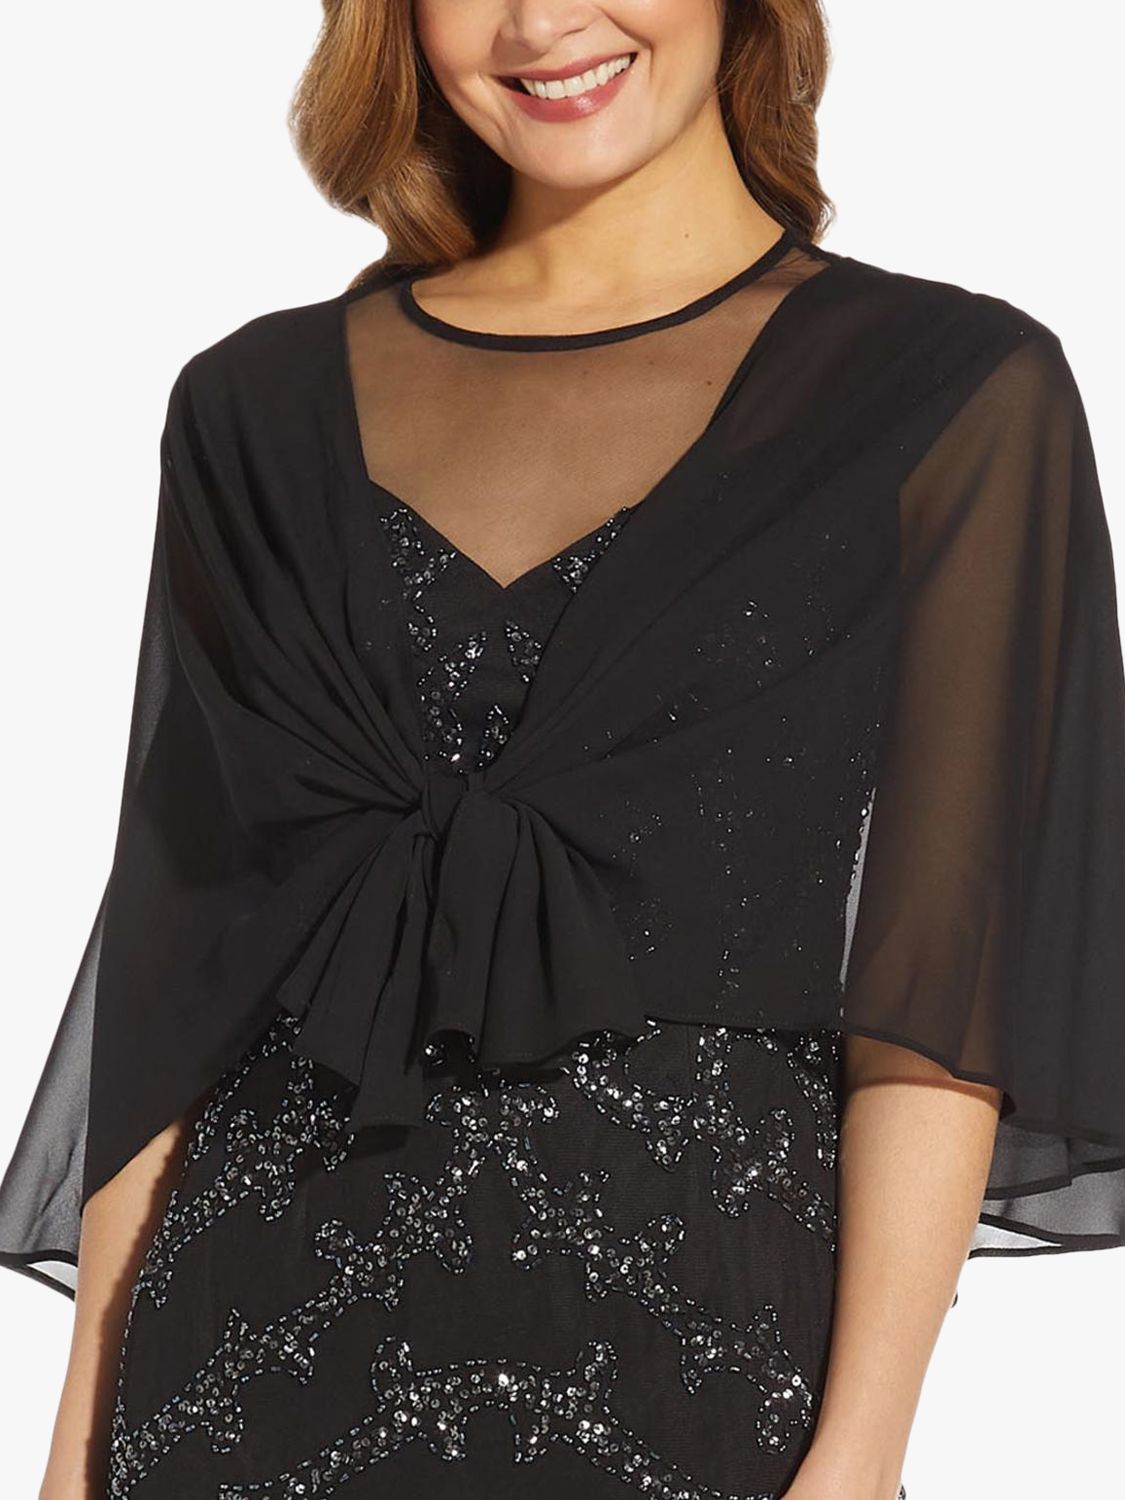 Adrianna Papell Chiffon Cover Up, Black at John Lewis & Partners